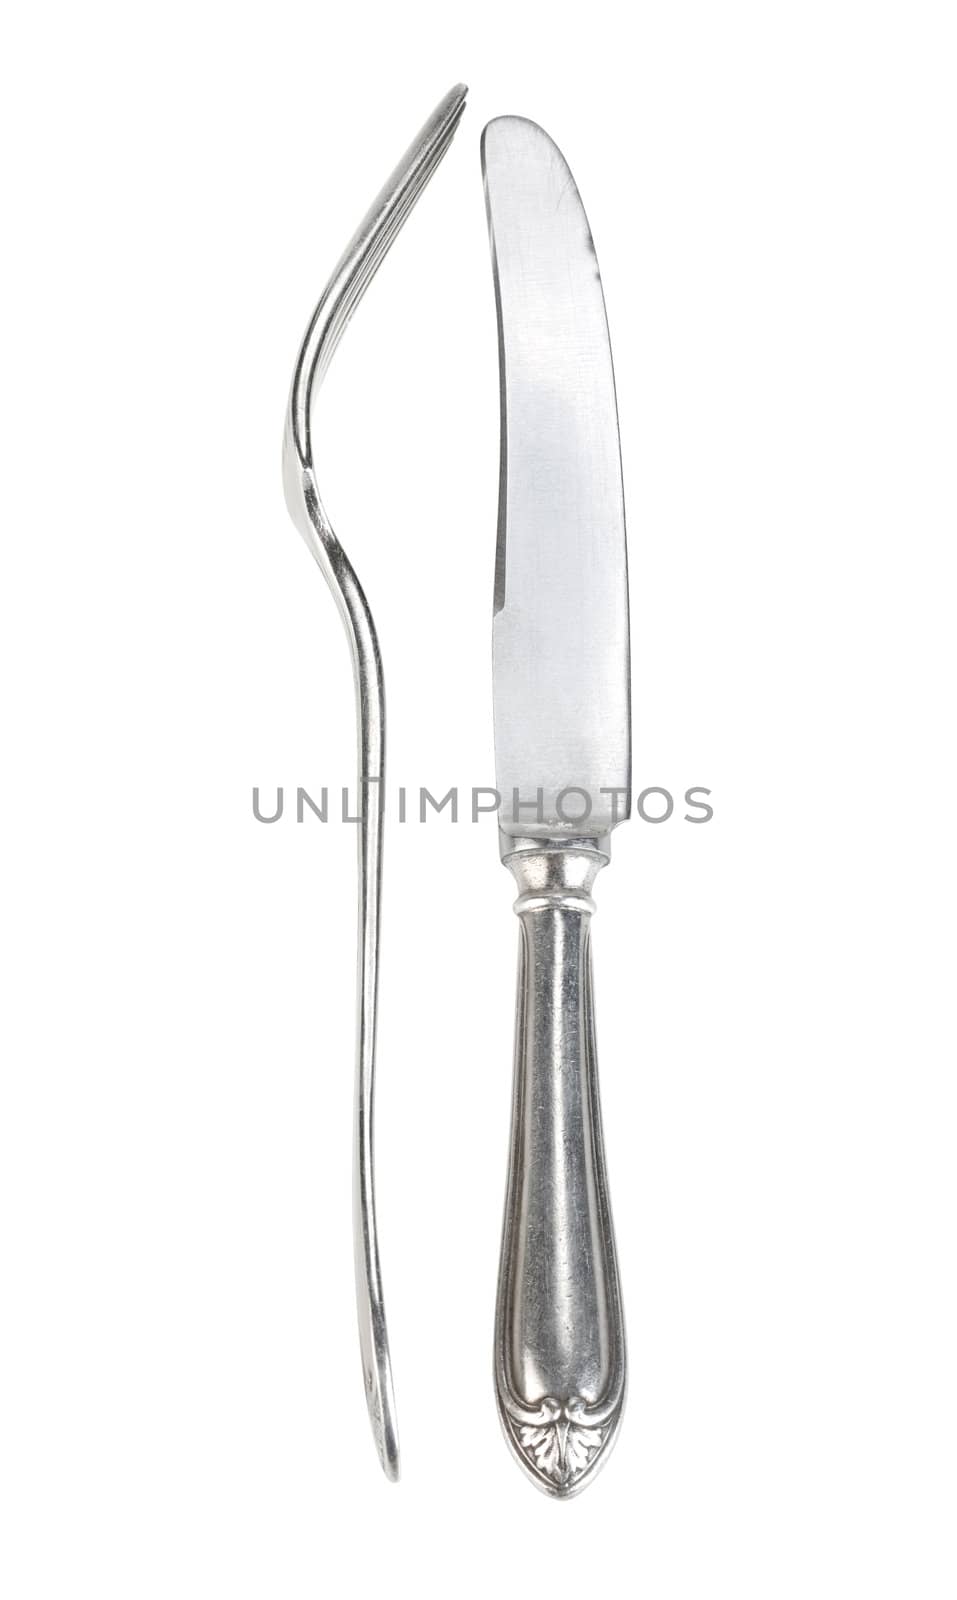 Fork and knife by fotoedgaras